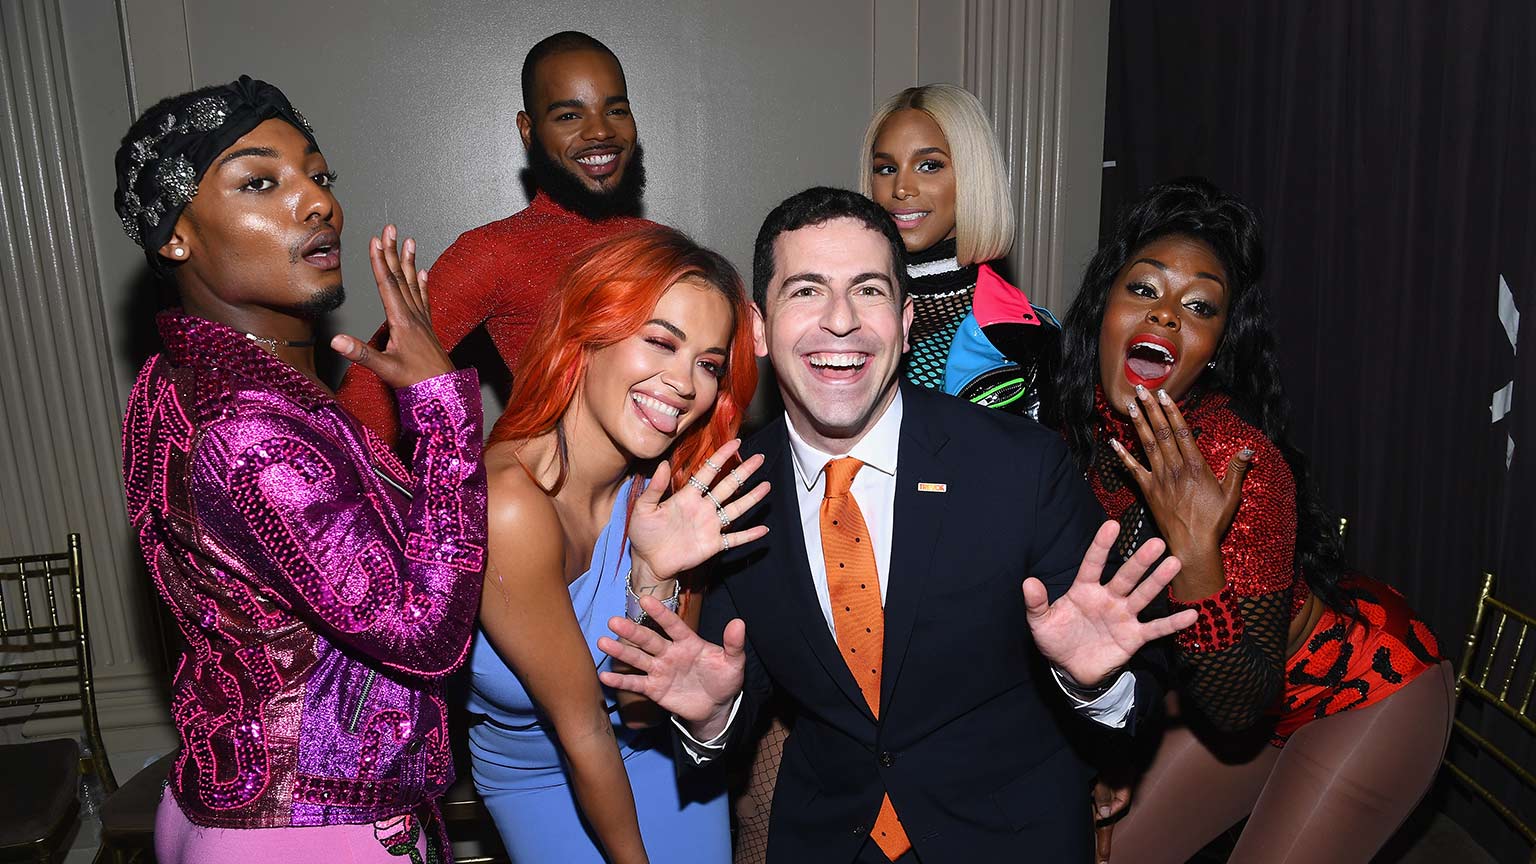 Photo of the Trevor Project CEO (and former McKinsey consultant) Amit Paley with singer Rita Ora and MTV’s Alex Mugler, Relish Milan, Tati 007, and Lolita Leopard at a 2018 event.